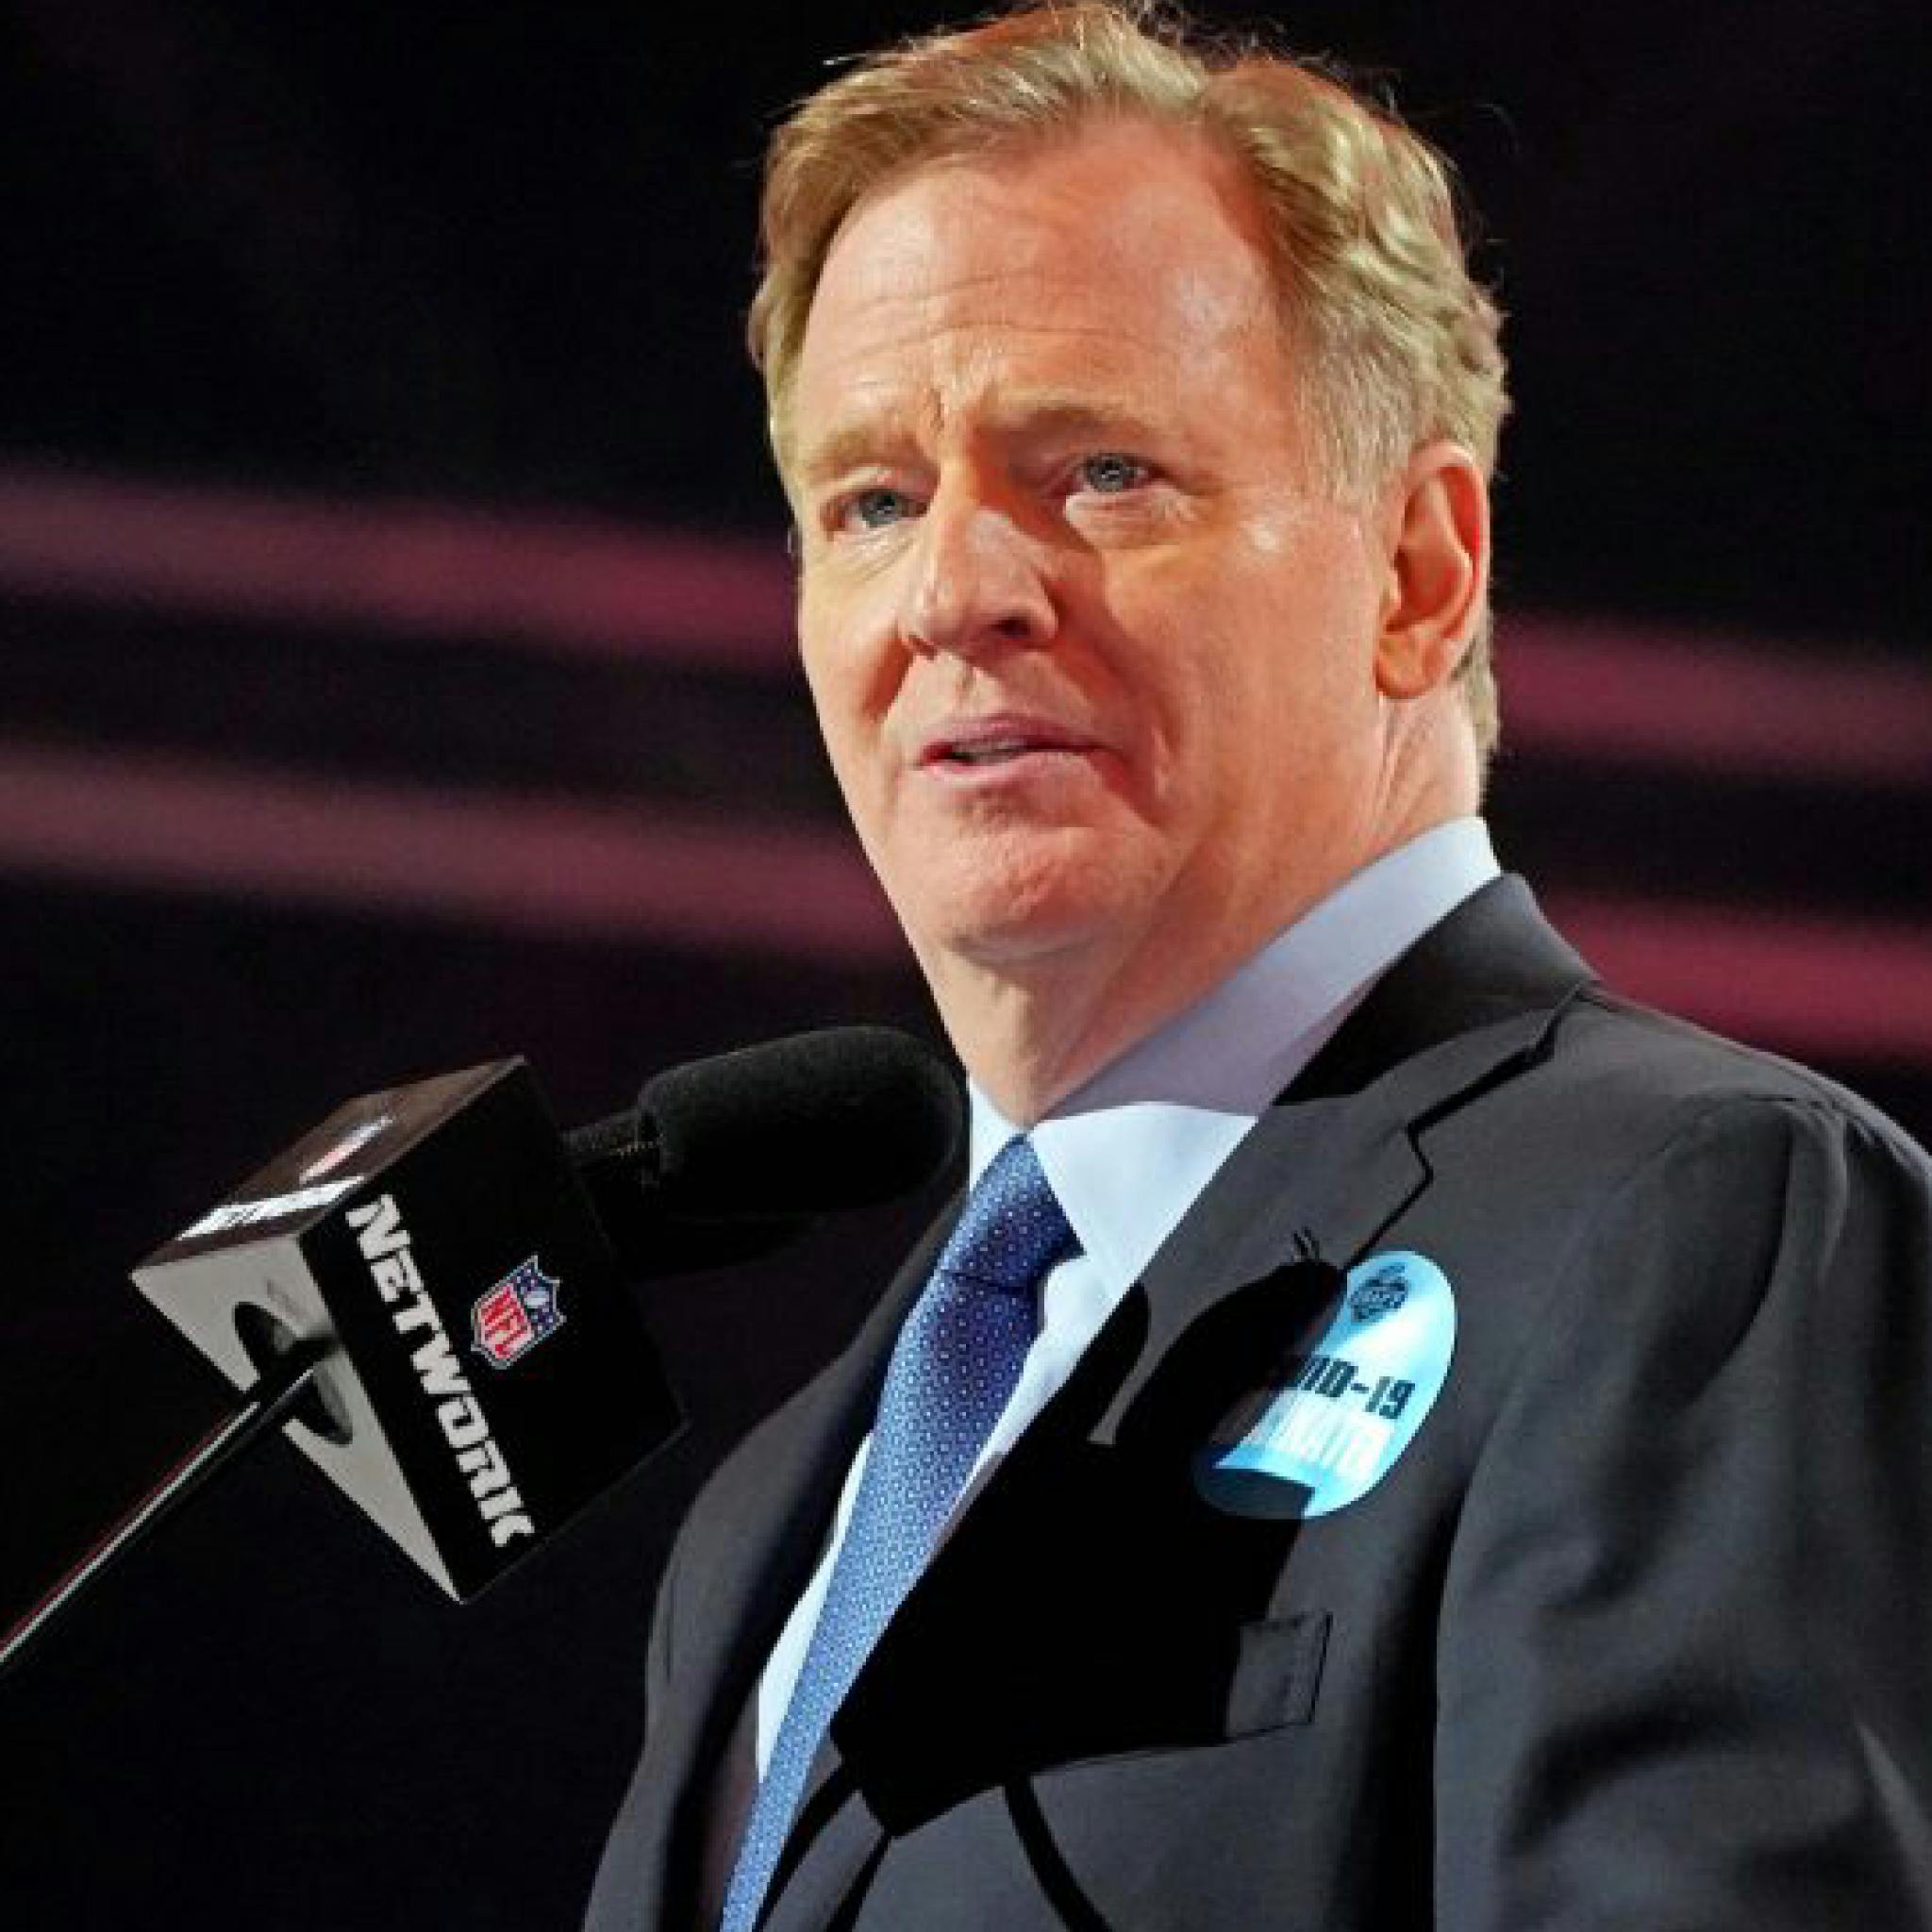 Roger Goodell Played Dumb When Asked About “Deflategate” Image